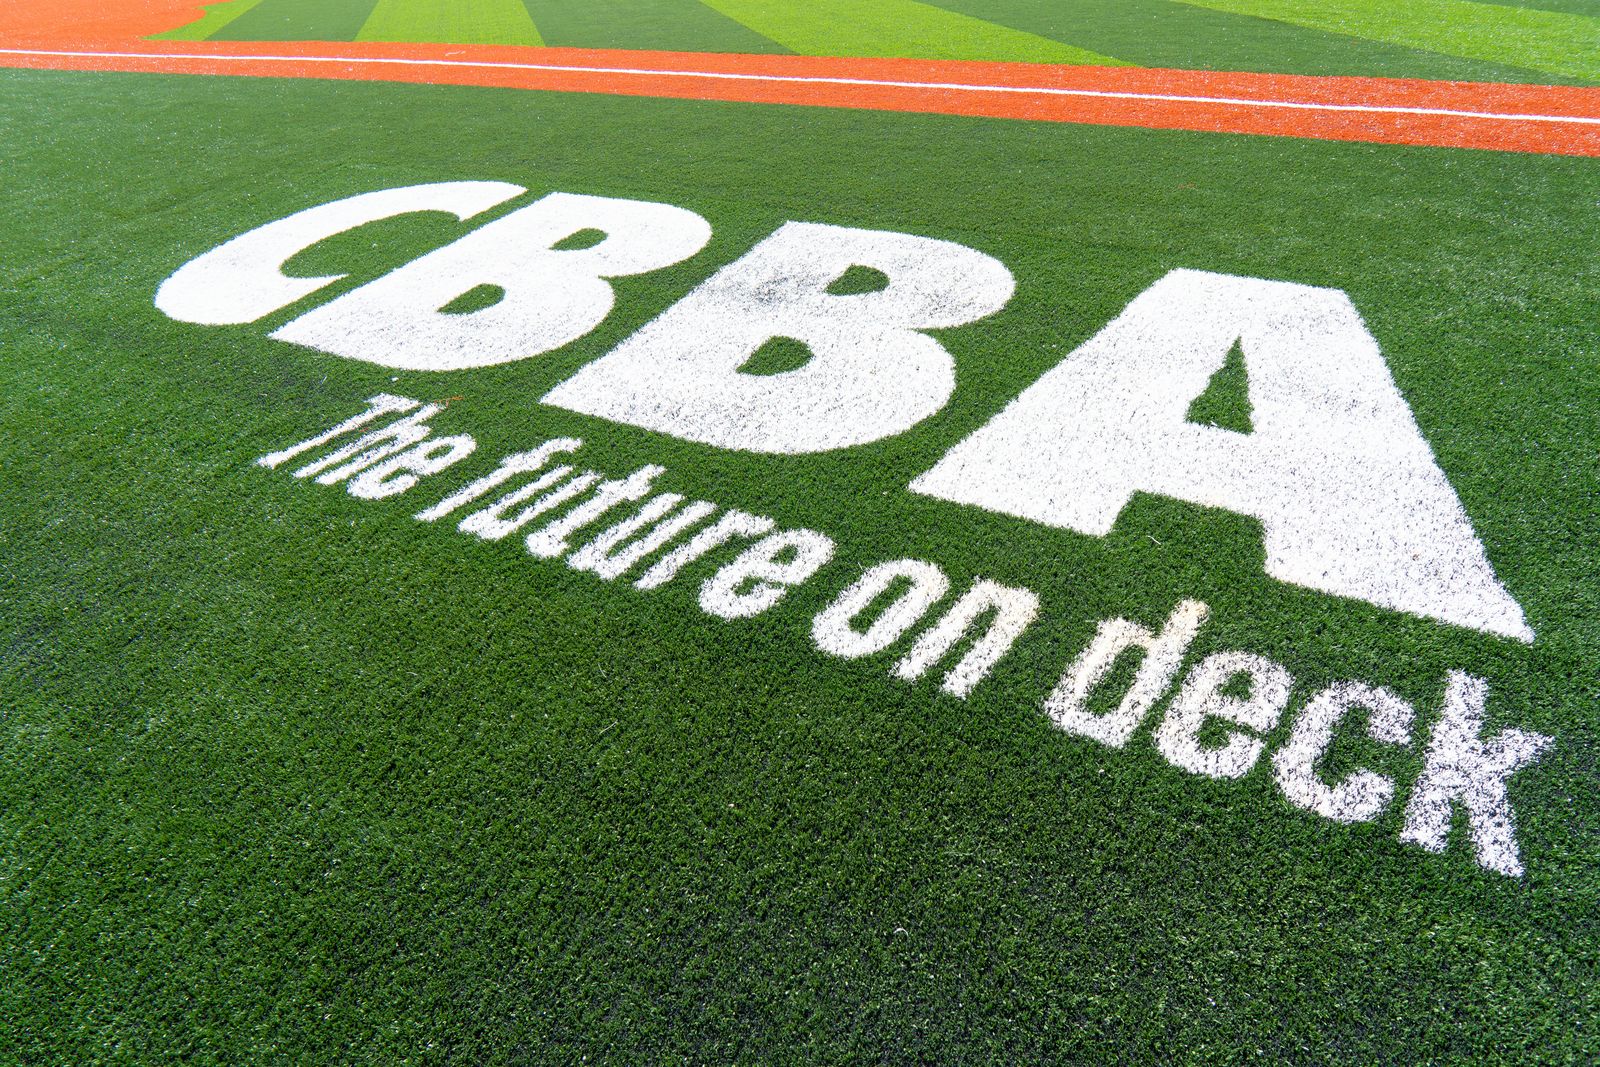 You are currently viewing Carlos Beltrán Baseball Academy (CBBA) Partners with Global Naming Agency Brand Institute